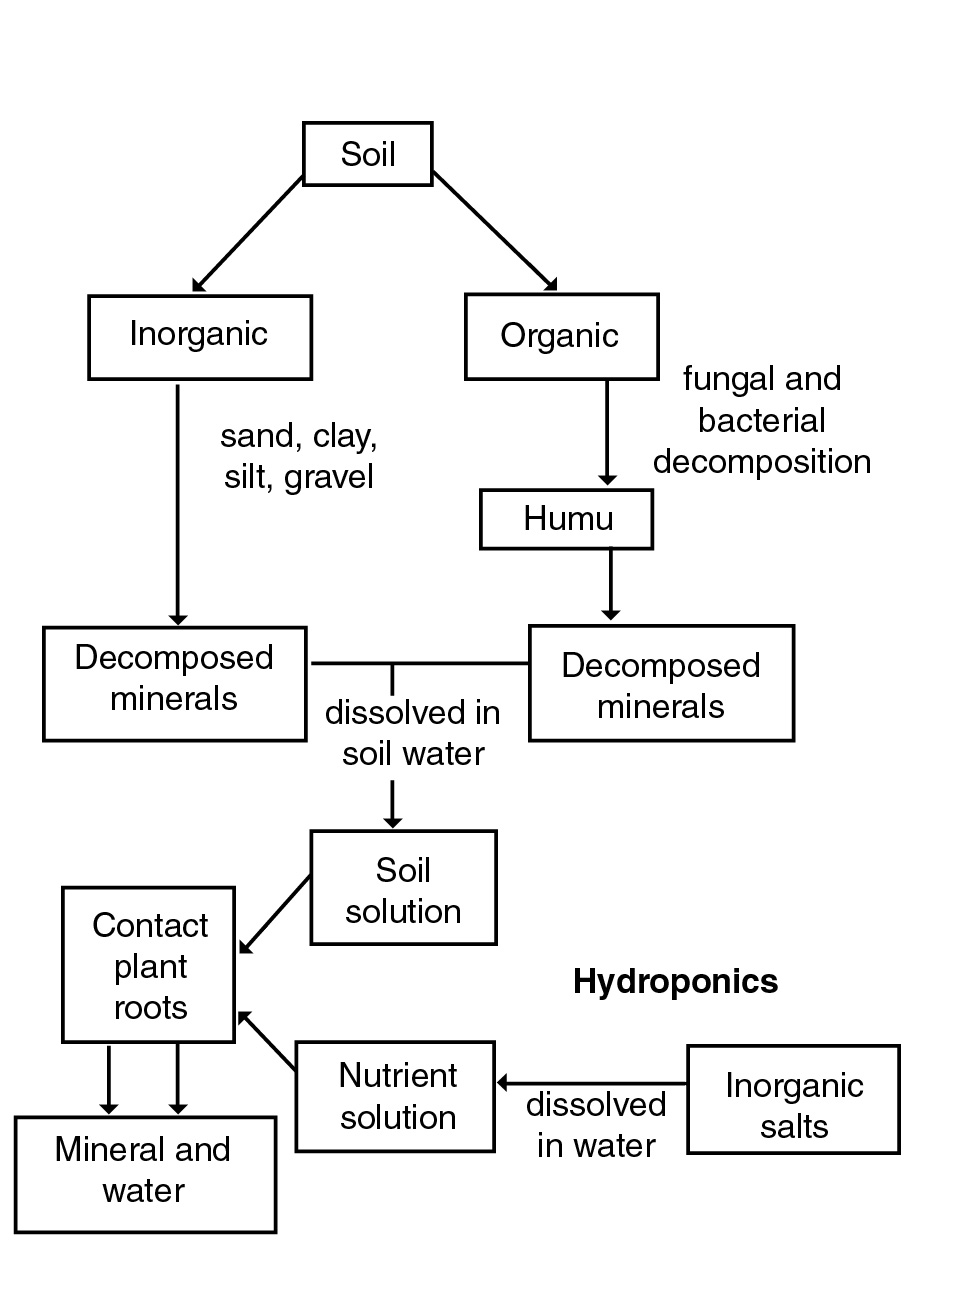 Origin of essential elements in soil and hydroponics